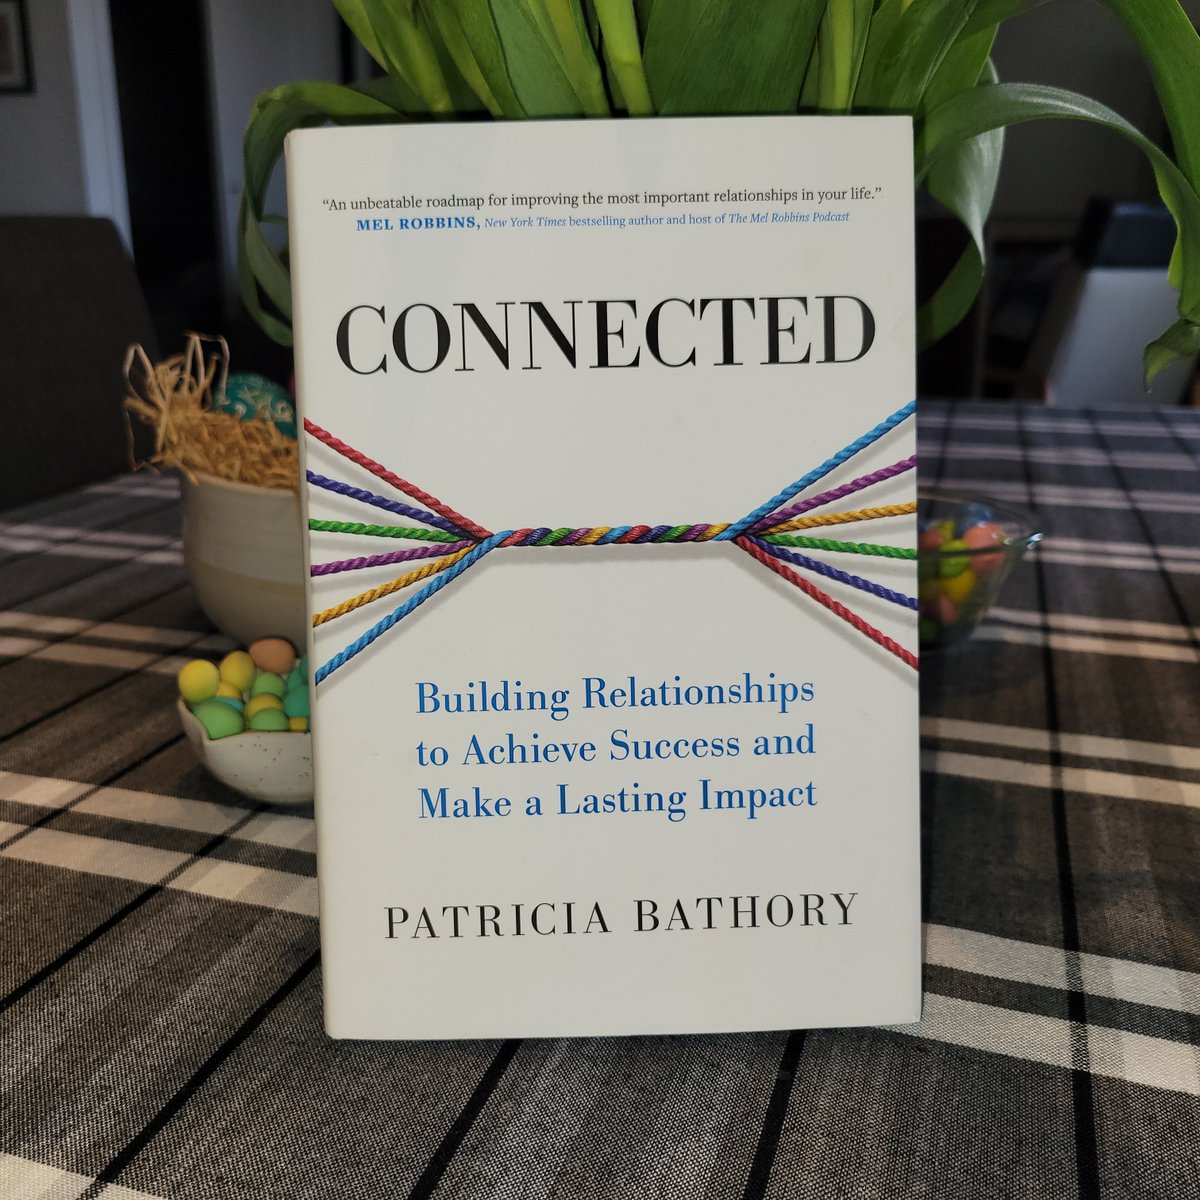 Hey Calgary! Come to the launch of 'Connected: Building Relationships to Achieve Success and Make a Lasting Impact.' I will be interviewing author Patricia Bathory, followed by Q&A and refreshments. Free and open to the public, register here: eventbrite.ca/e/book-launch-…